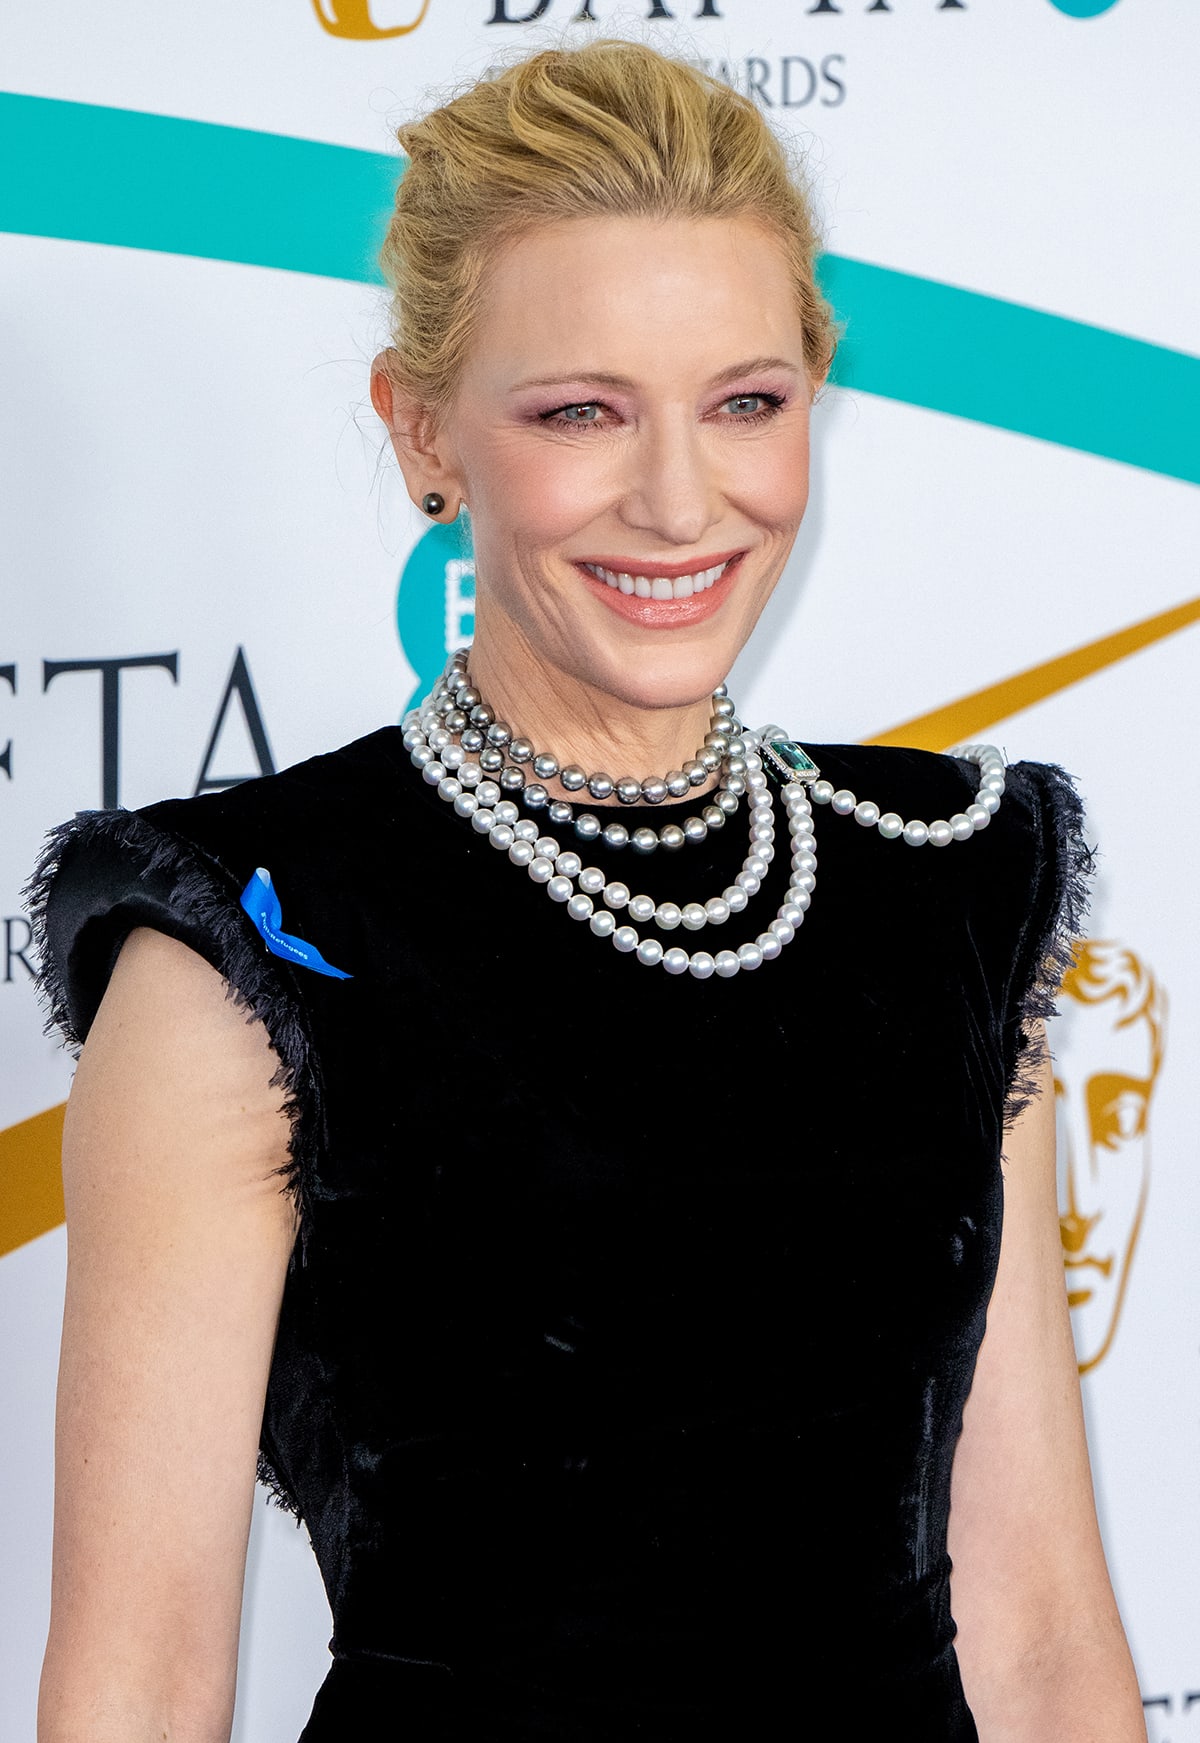 Cate Blanchett wears a blue ribbon to show support for refugees and displaced people around the world